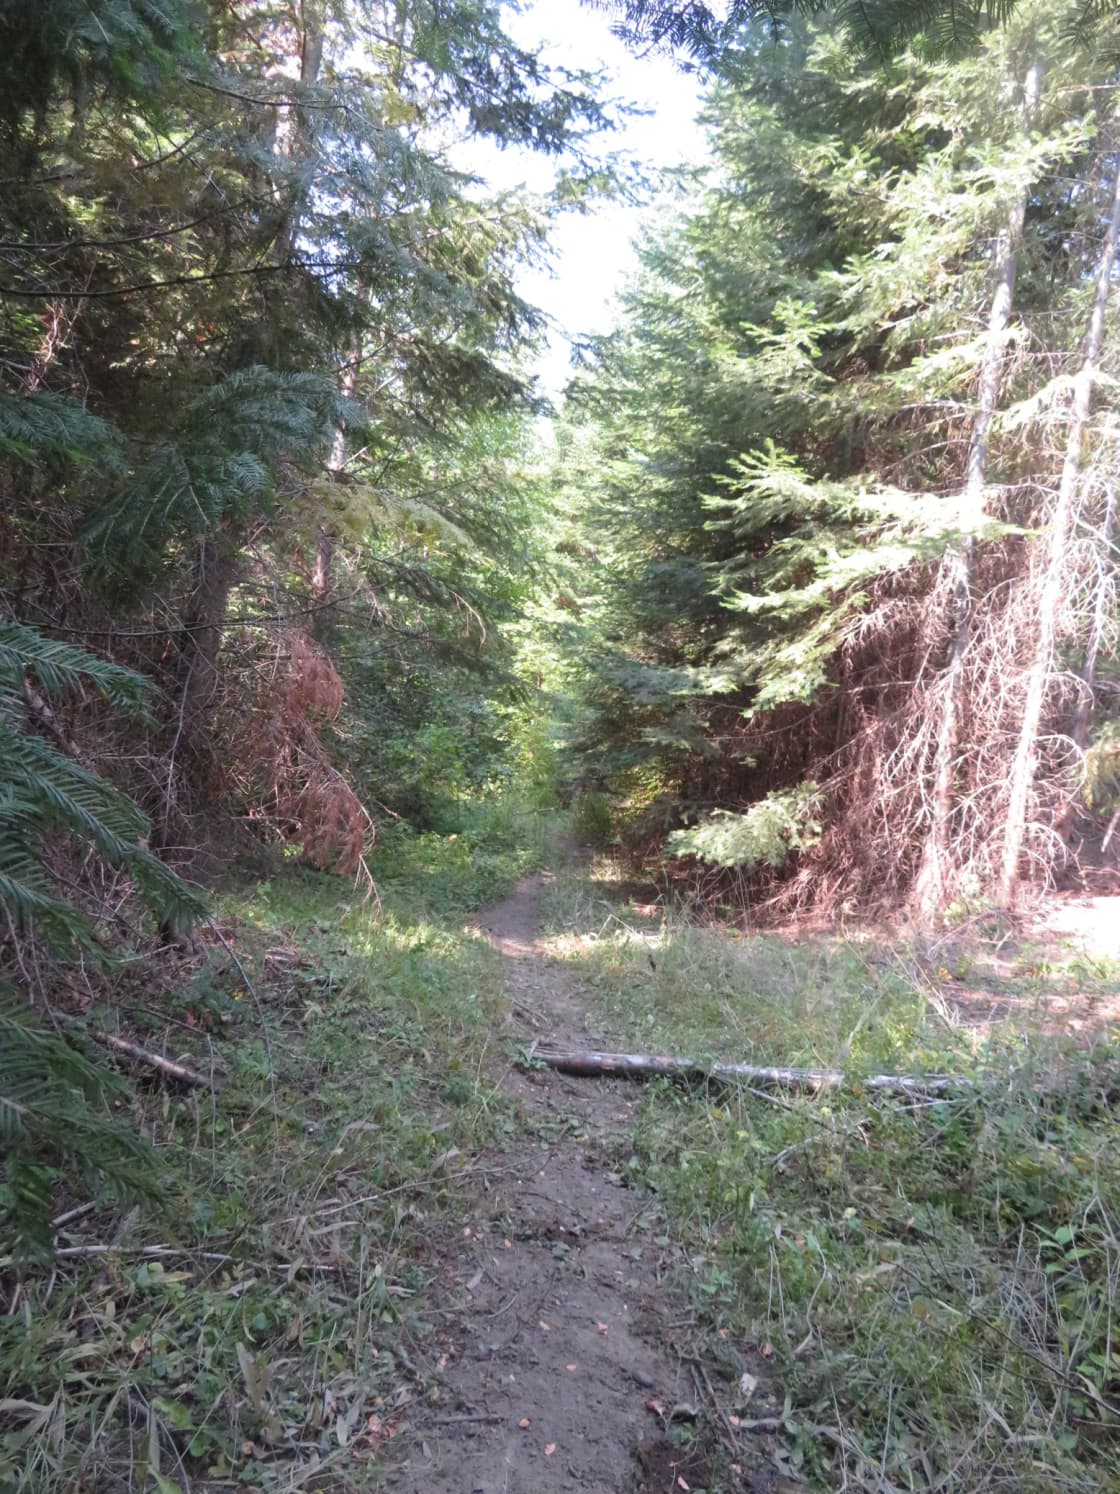 One of the shady tree lined trails available.. Too narrow to drive, but one could camp in an open area along side trails like this if supplies were carried in. 